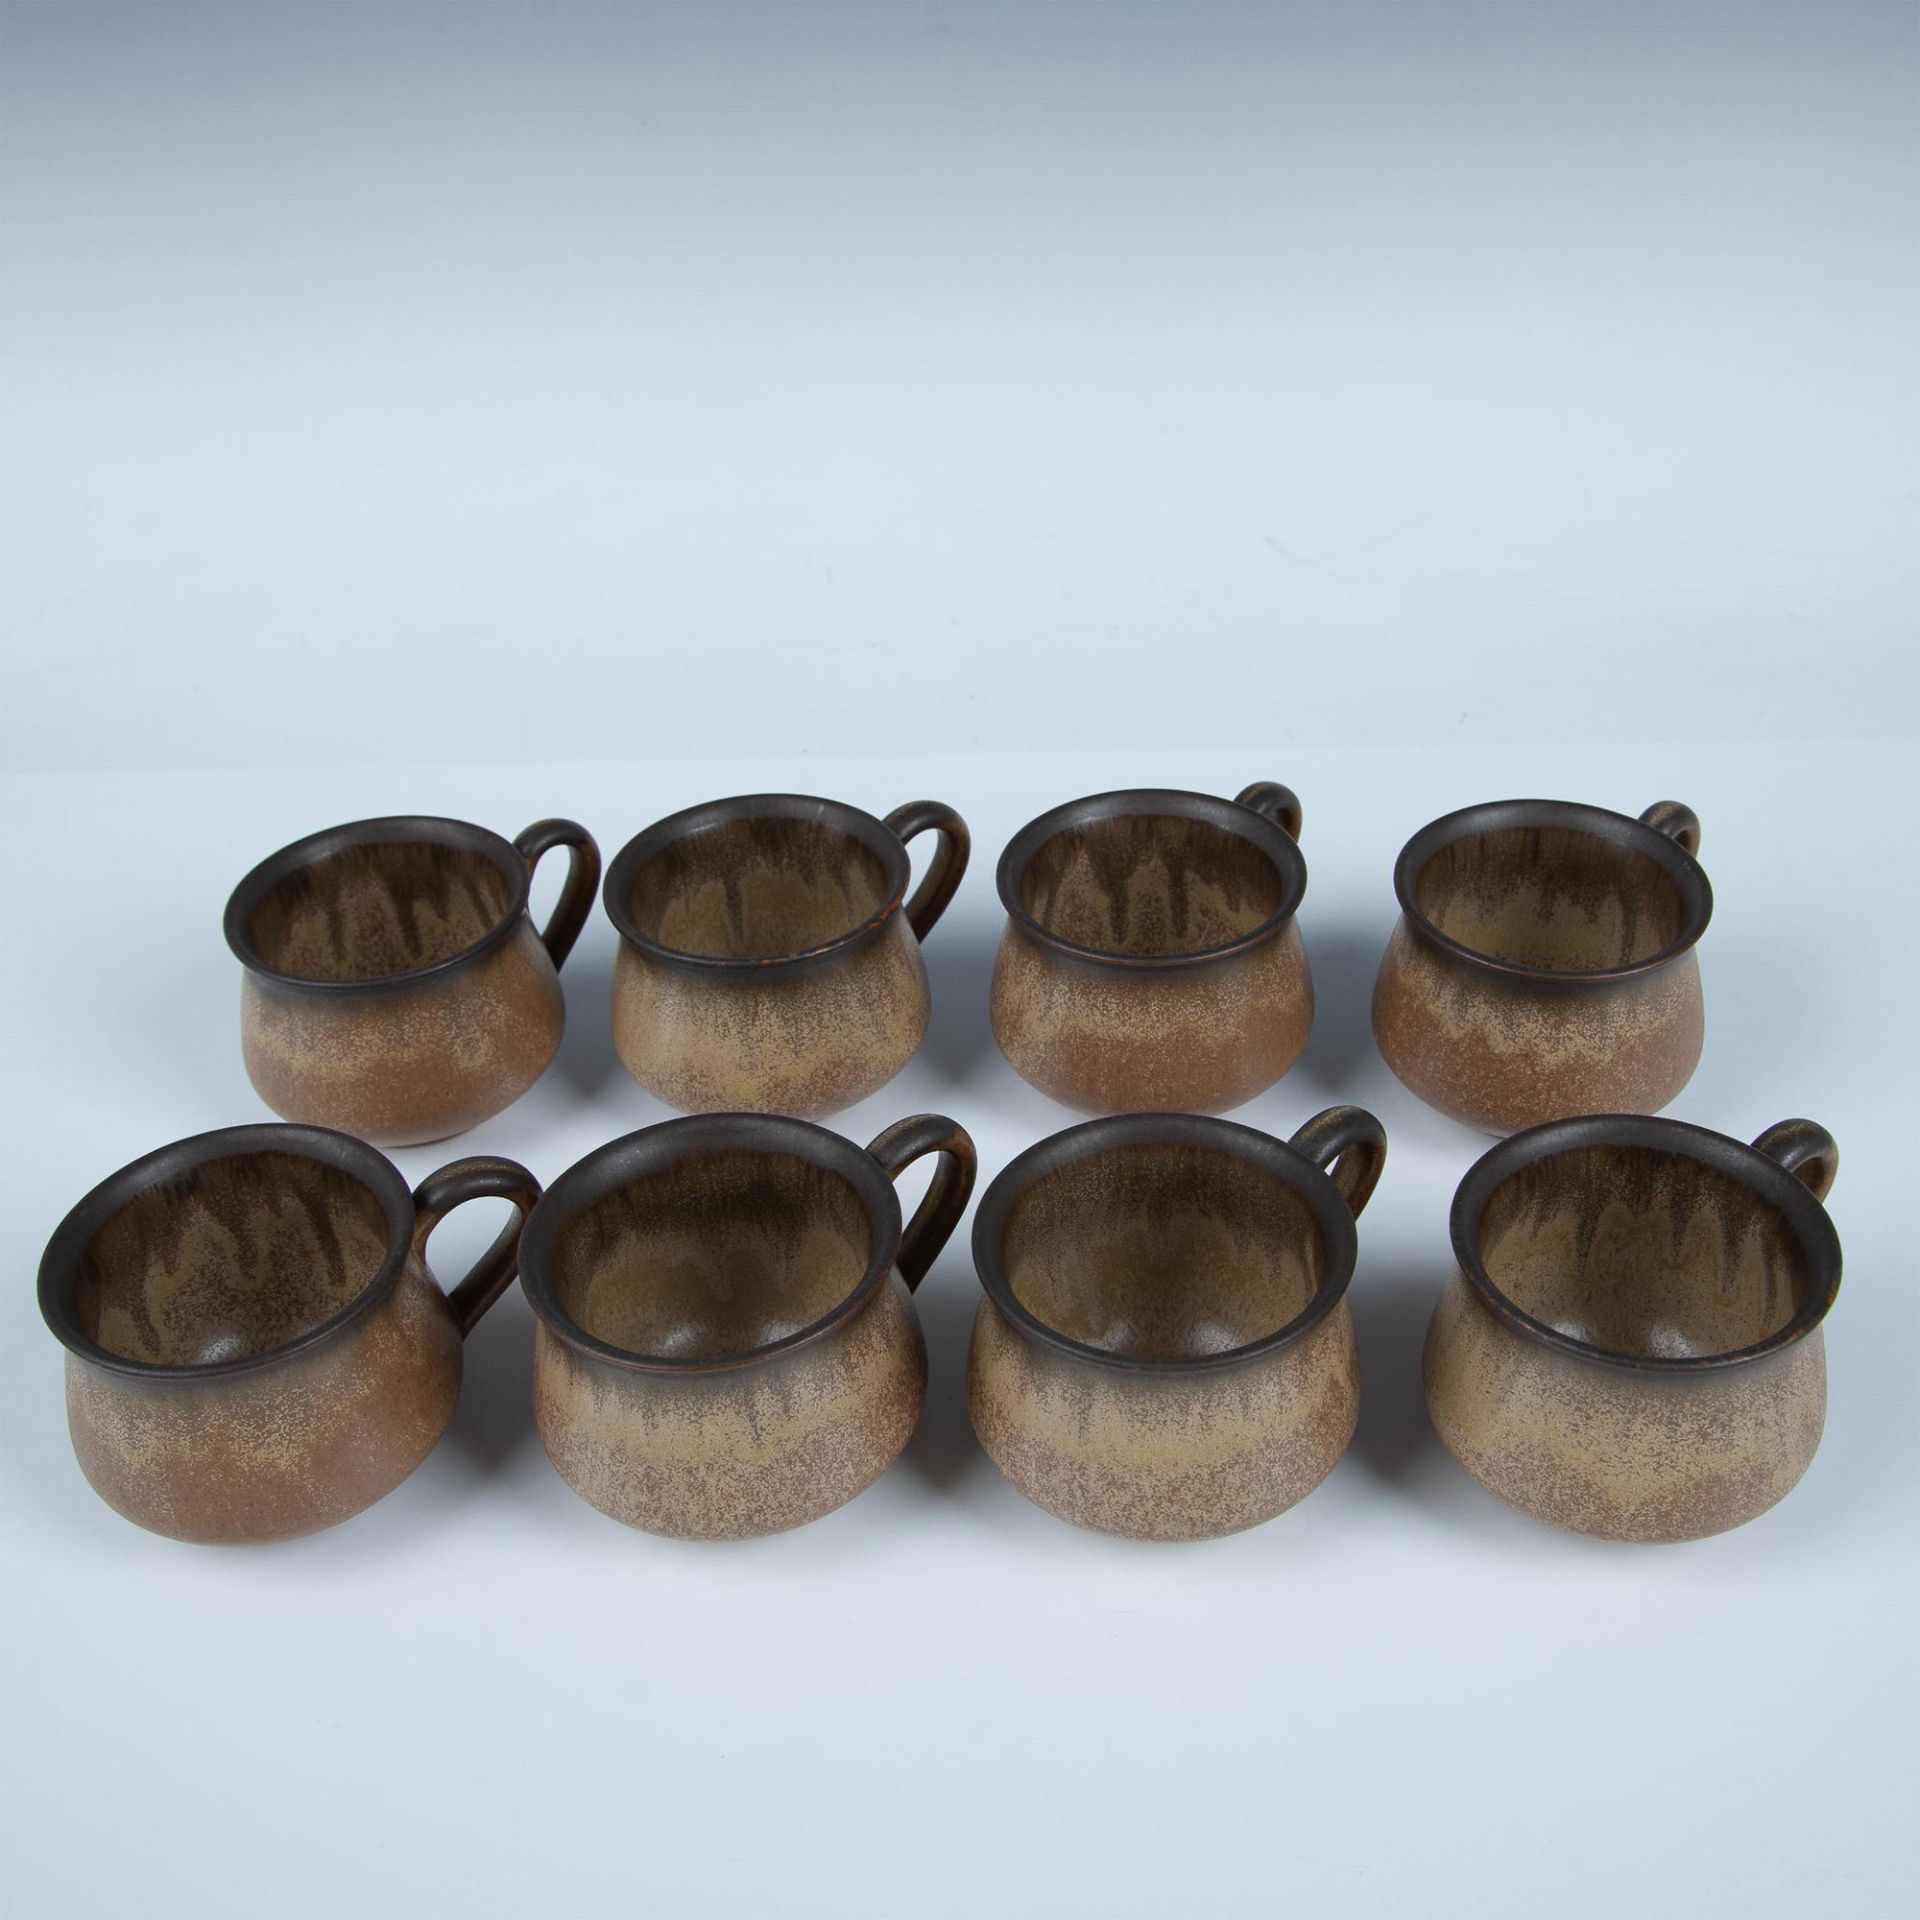 58pc Denby-Langley Stoneware Dinnerware Set, Romany Brown - Image 6 of 19